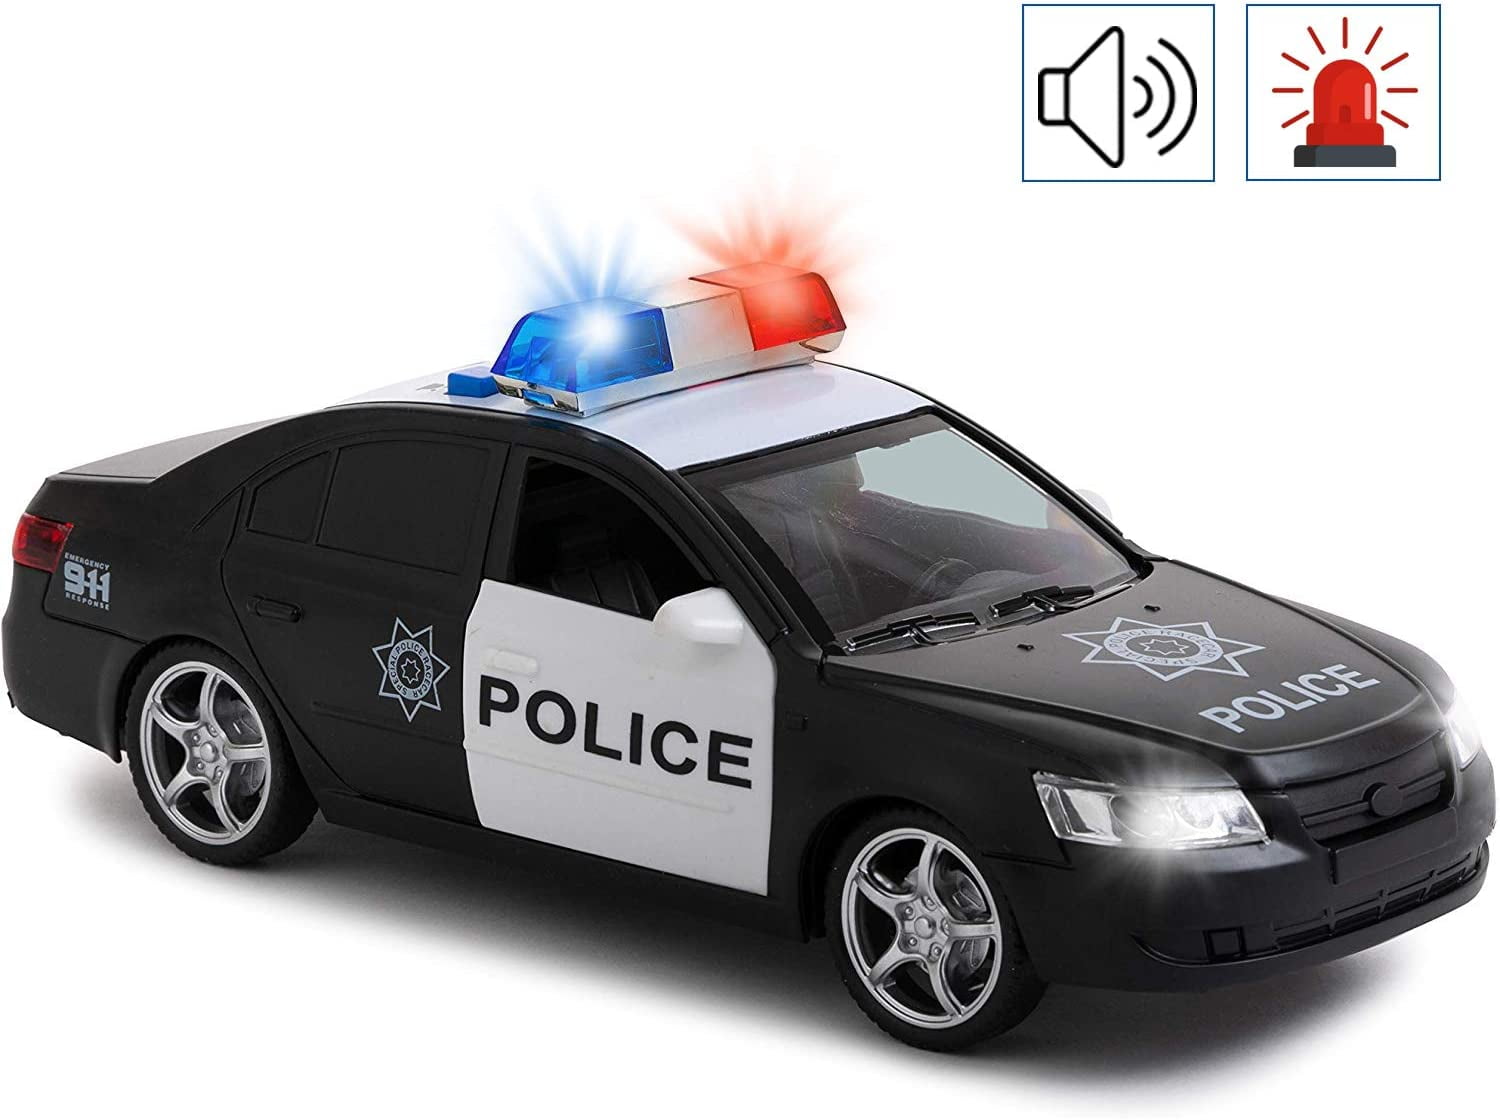 Toy To Enjoy Friction Powered Police Car with Light & Sounds